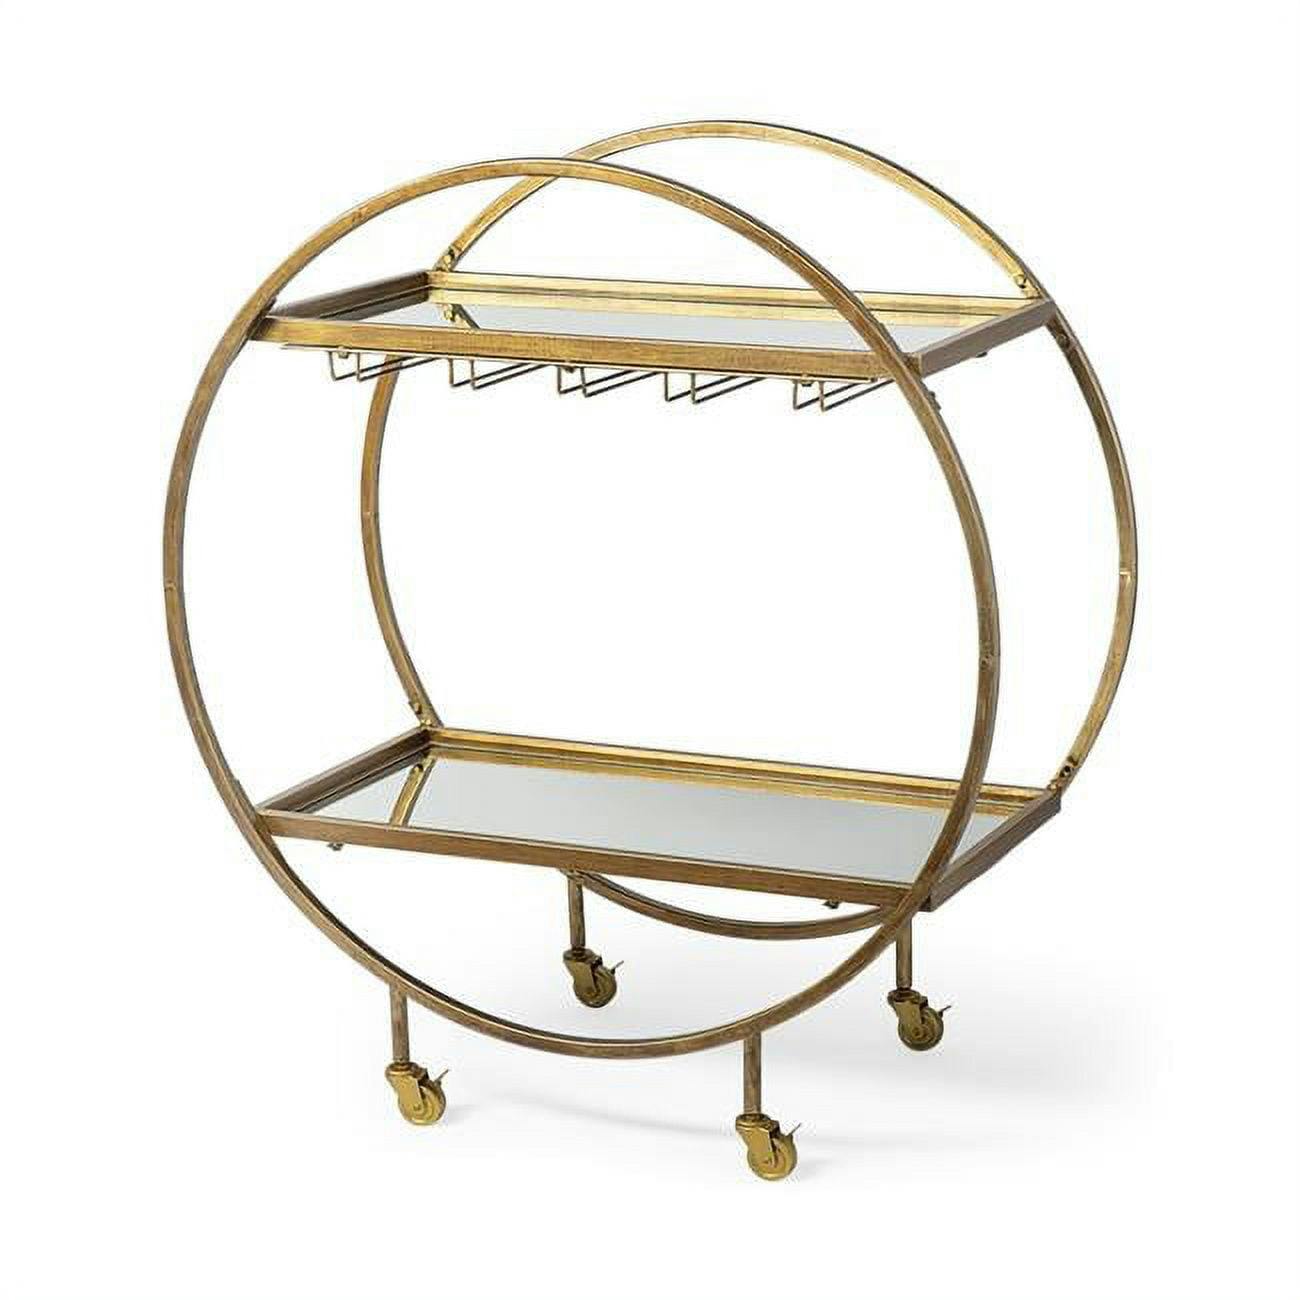 Luxury Antiqued Gold Circular Bar Cart with Mirrored Shelves